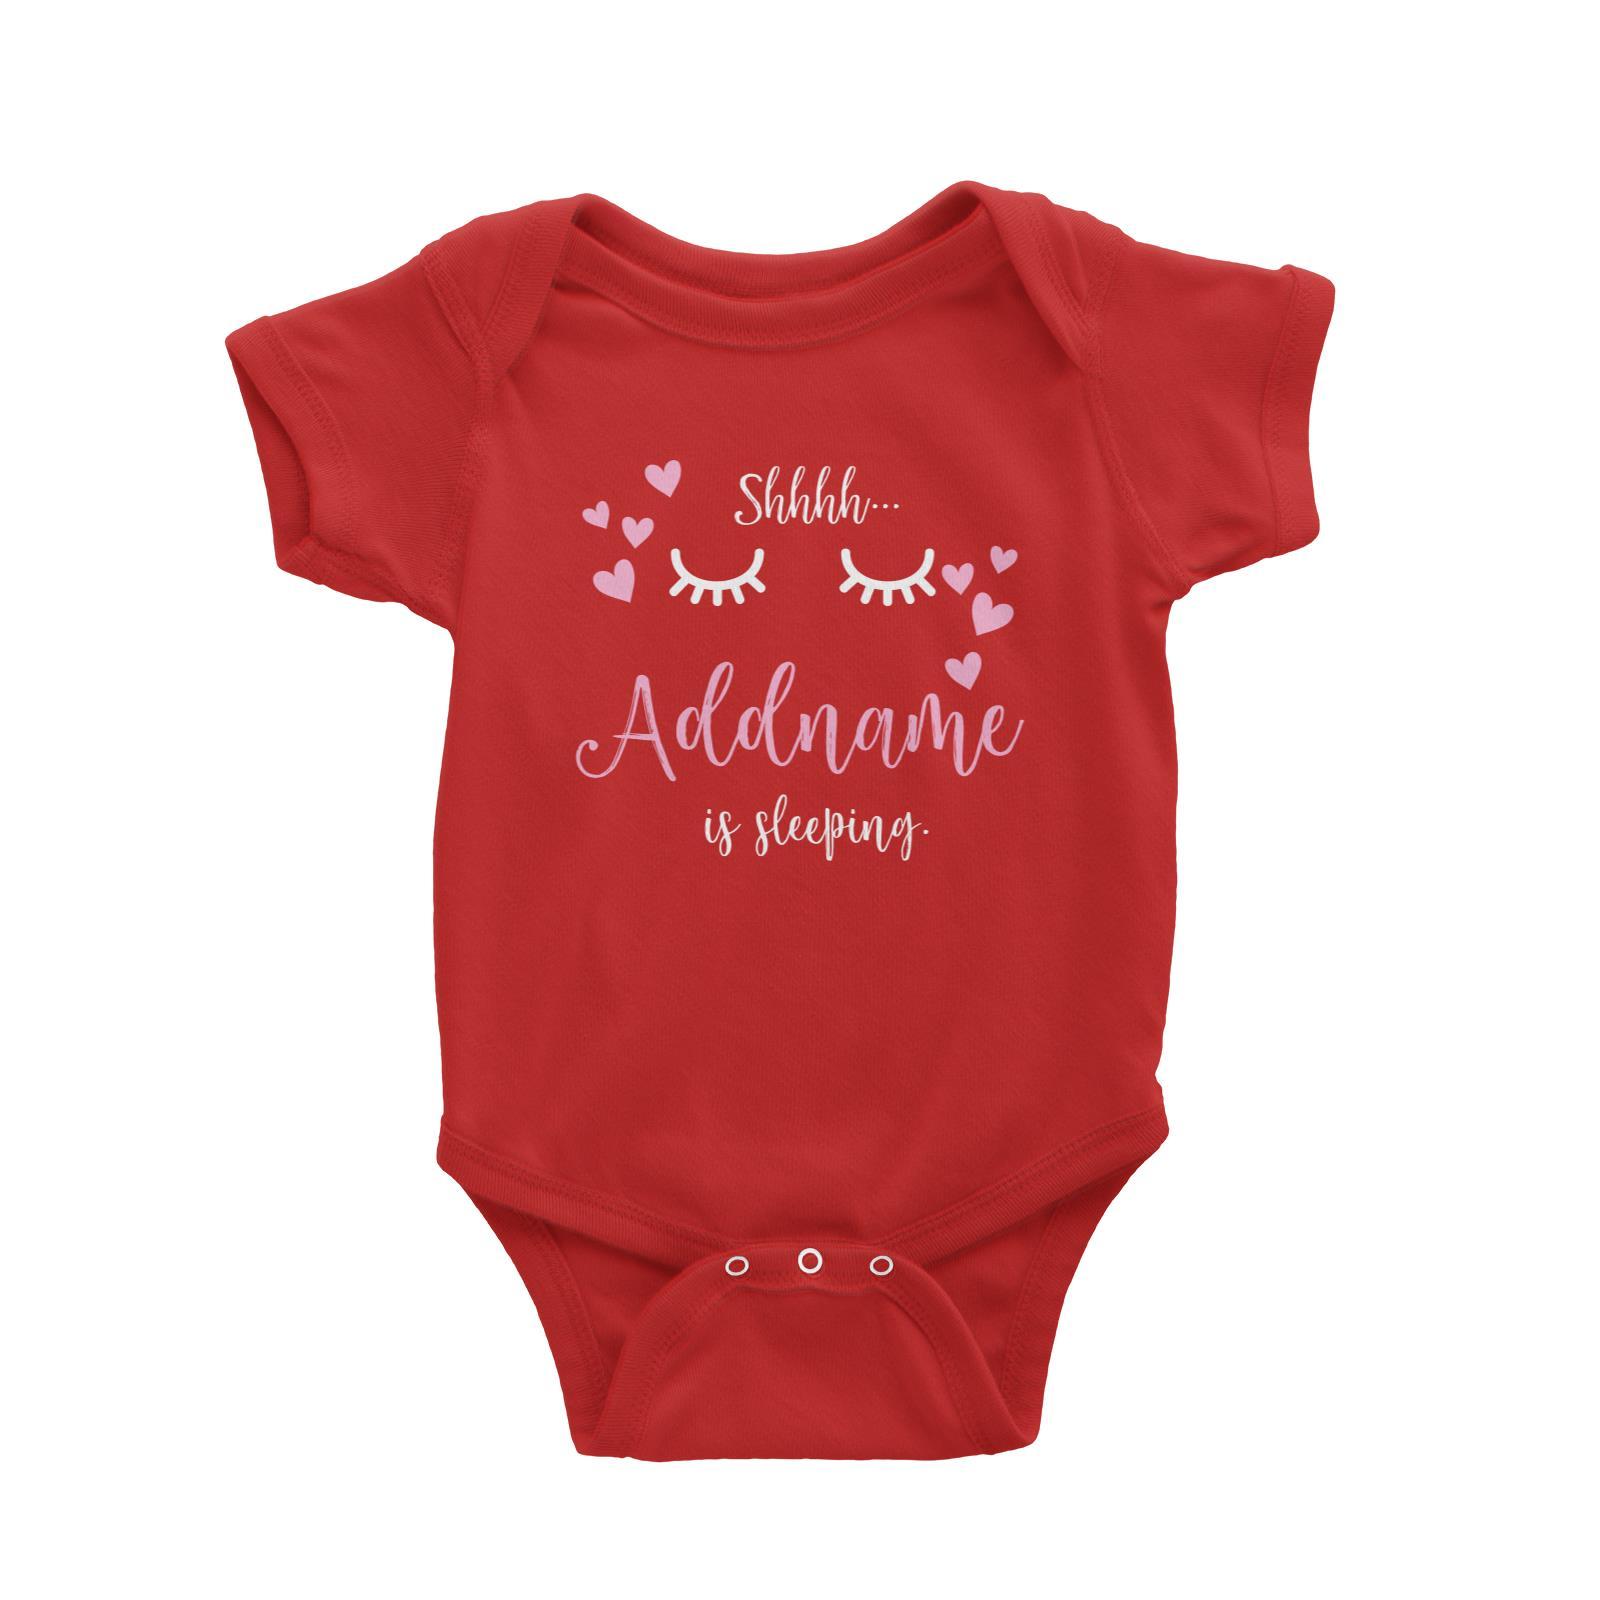 Shhh Addname is Sleeping with Hearts Baby Romper